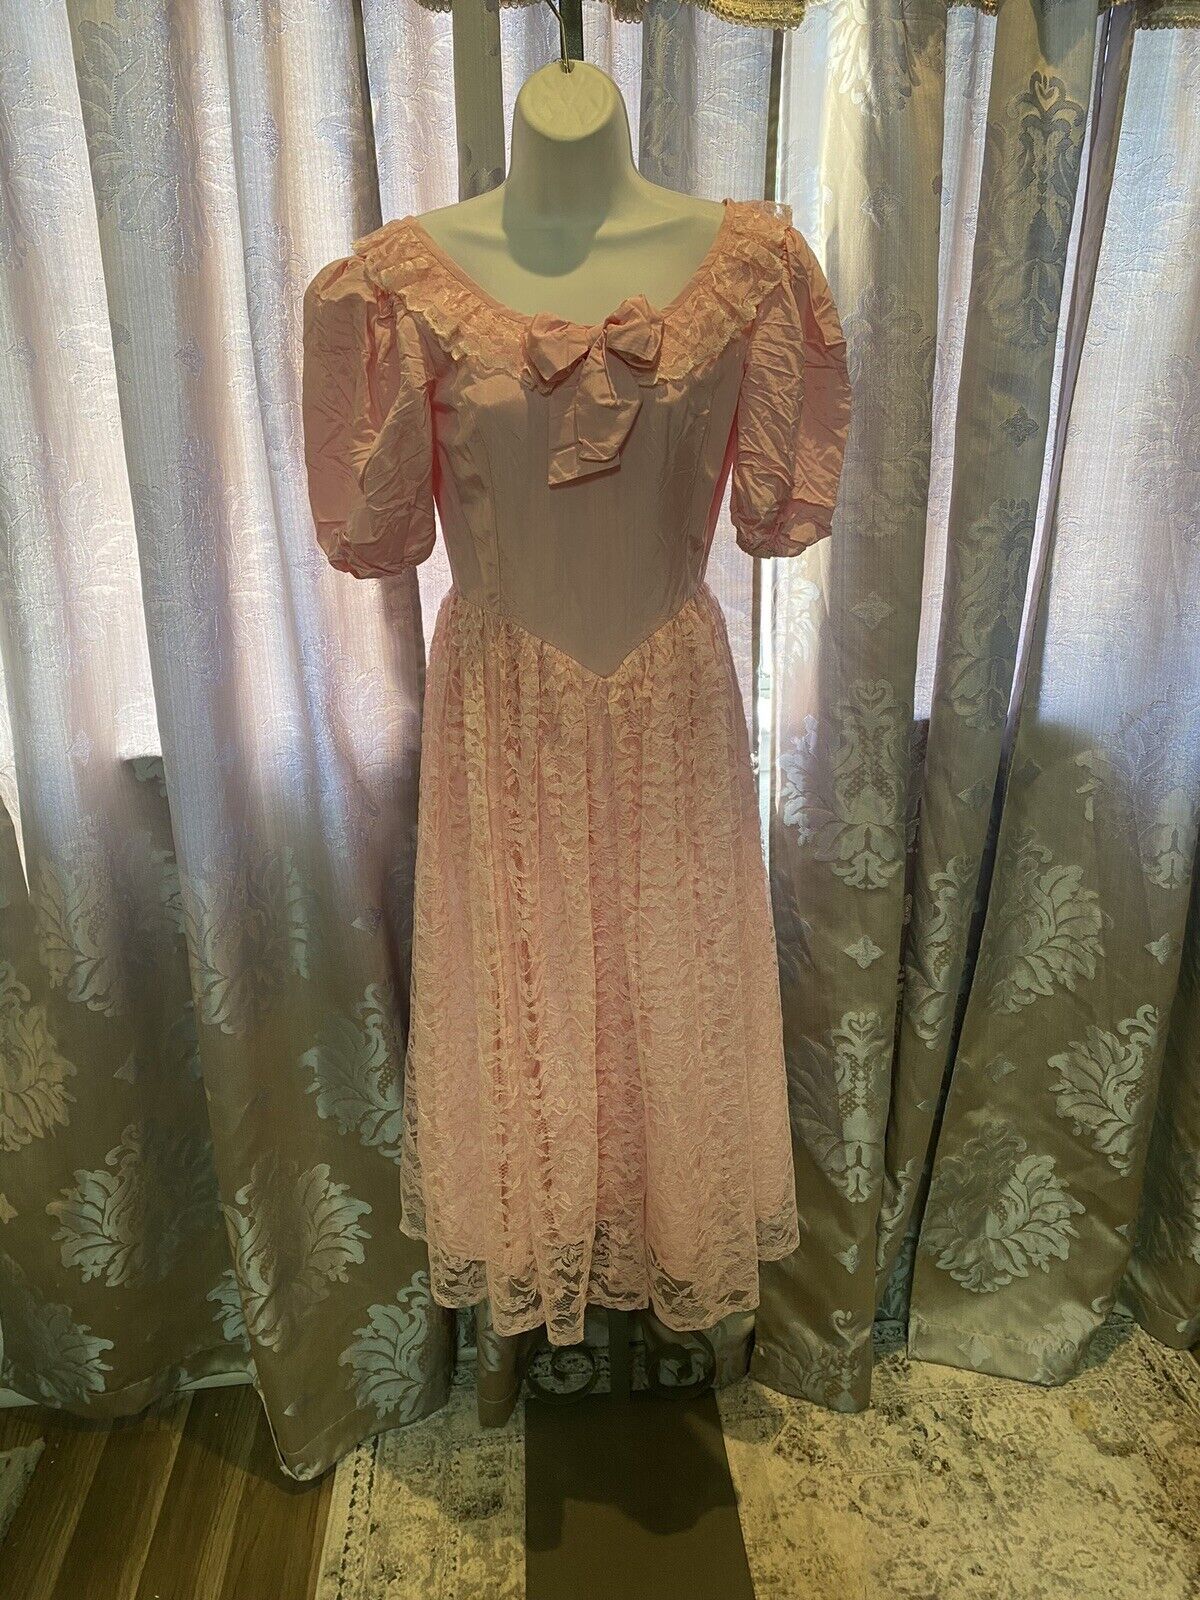 Vintage Handmade Lace Pink Dress Bow Front & Back 60s